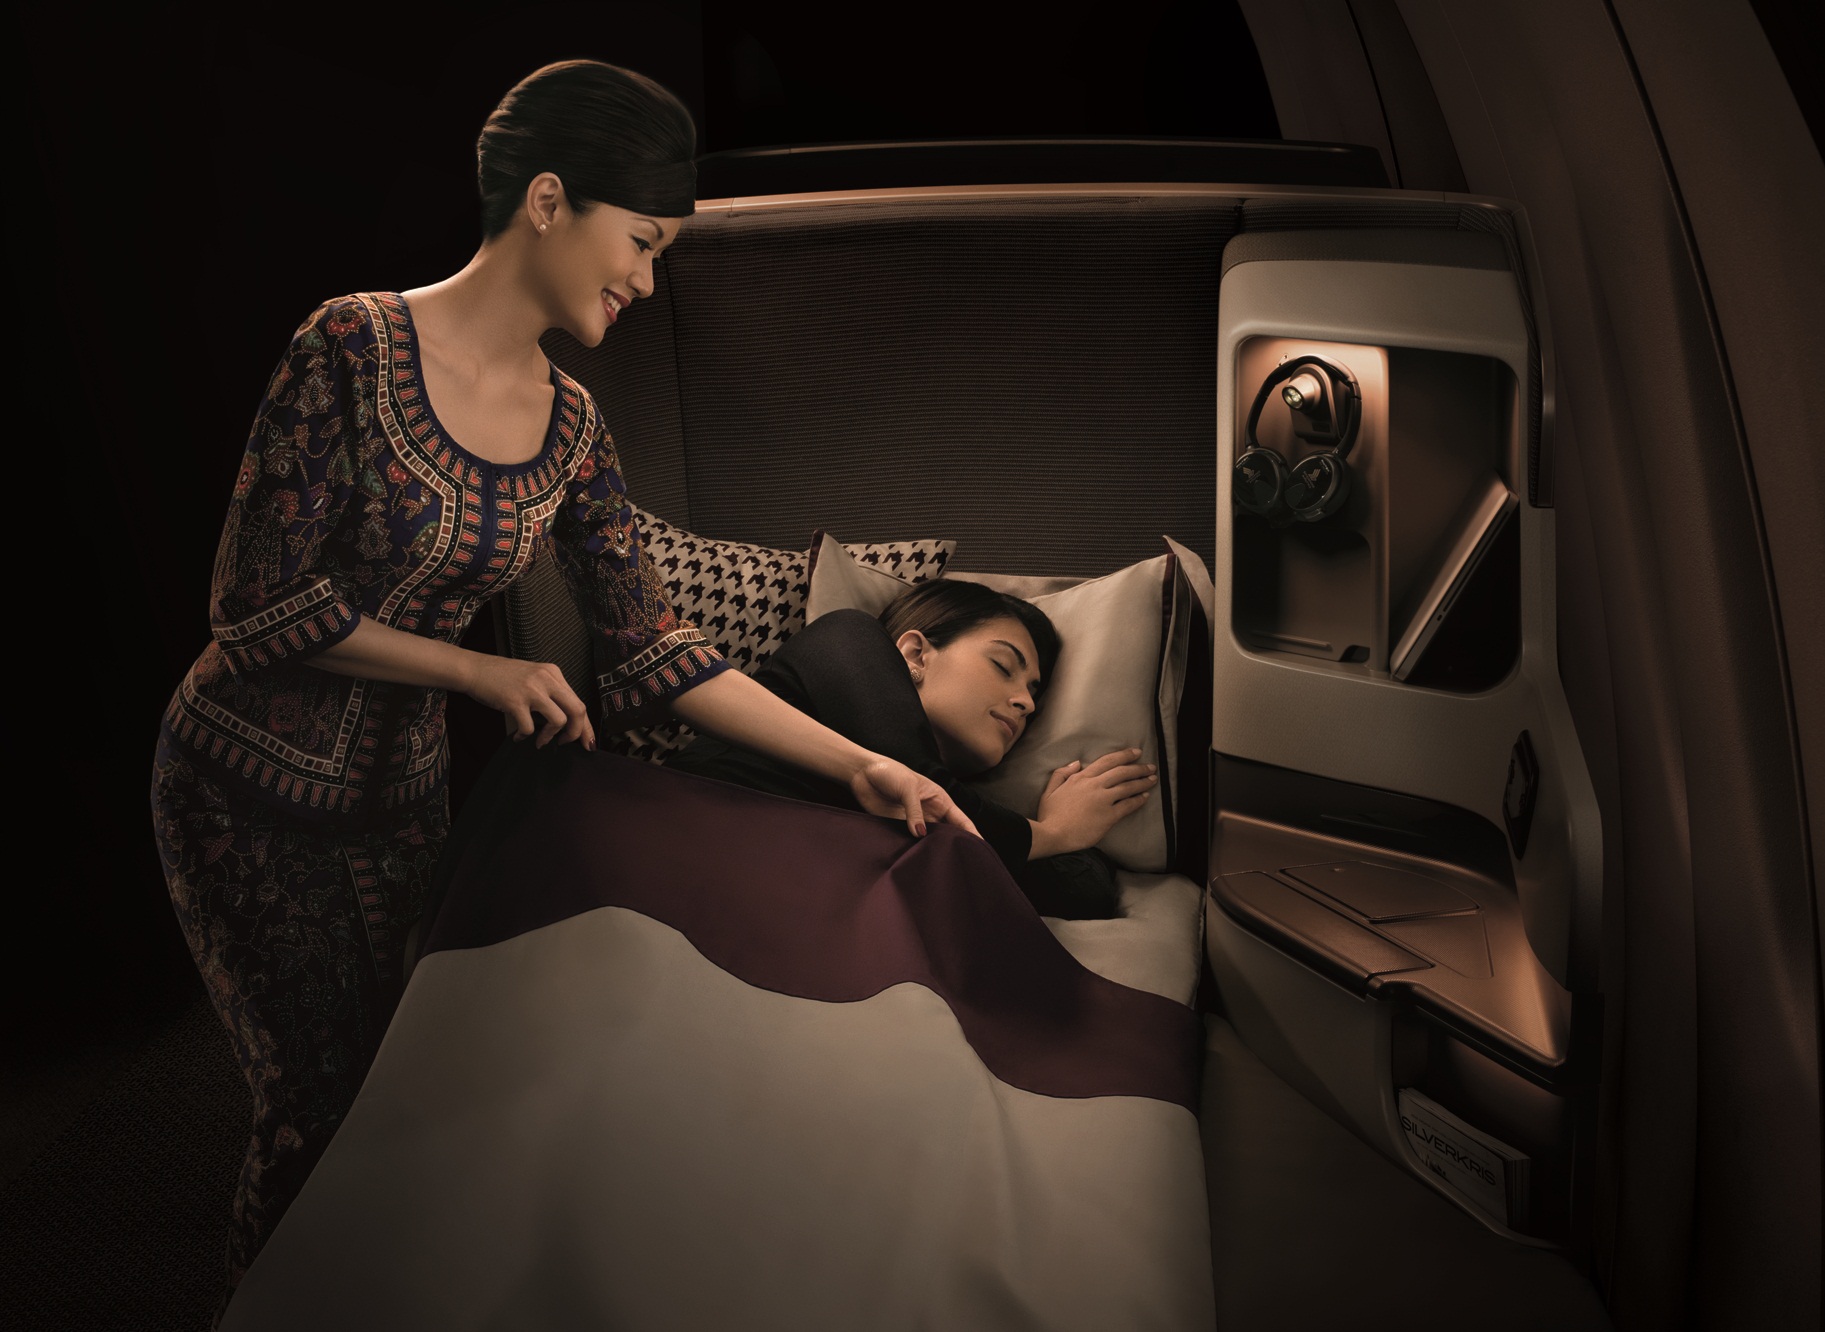 Singapore Airlines is hiring new Cabin Crew. Find out all the details